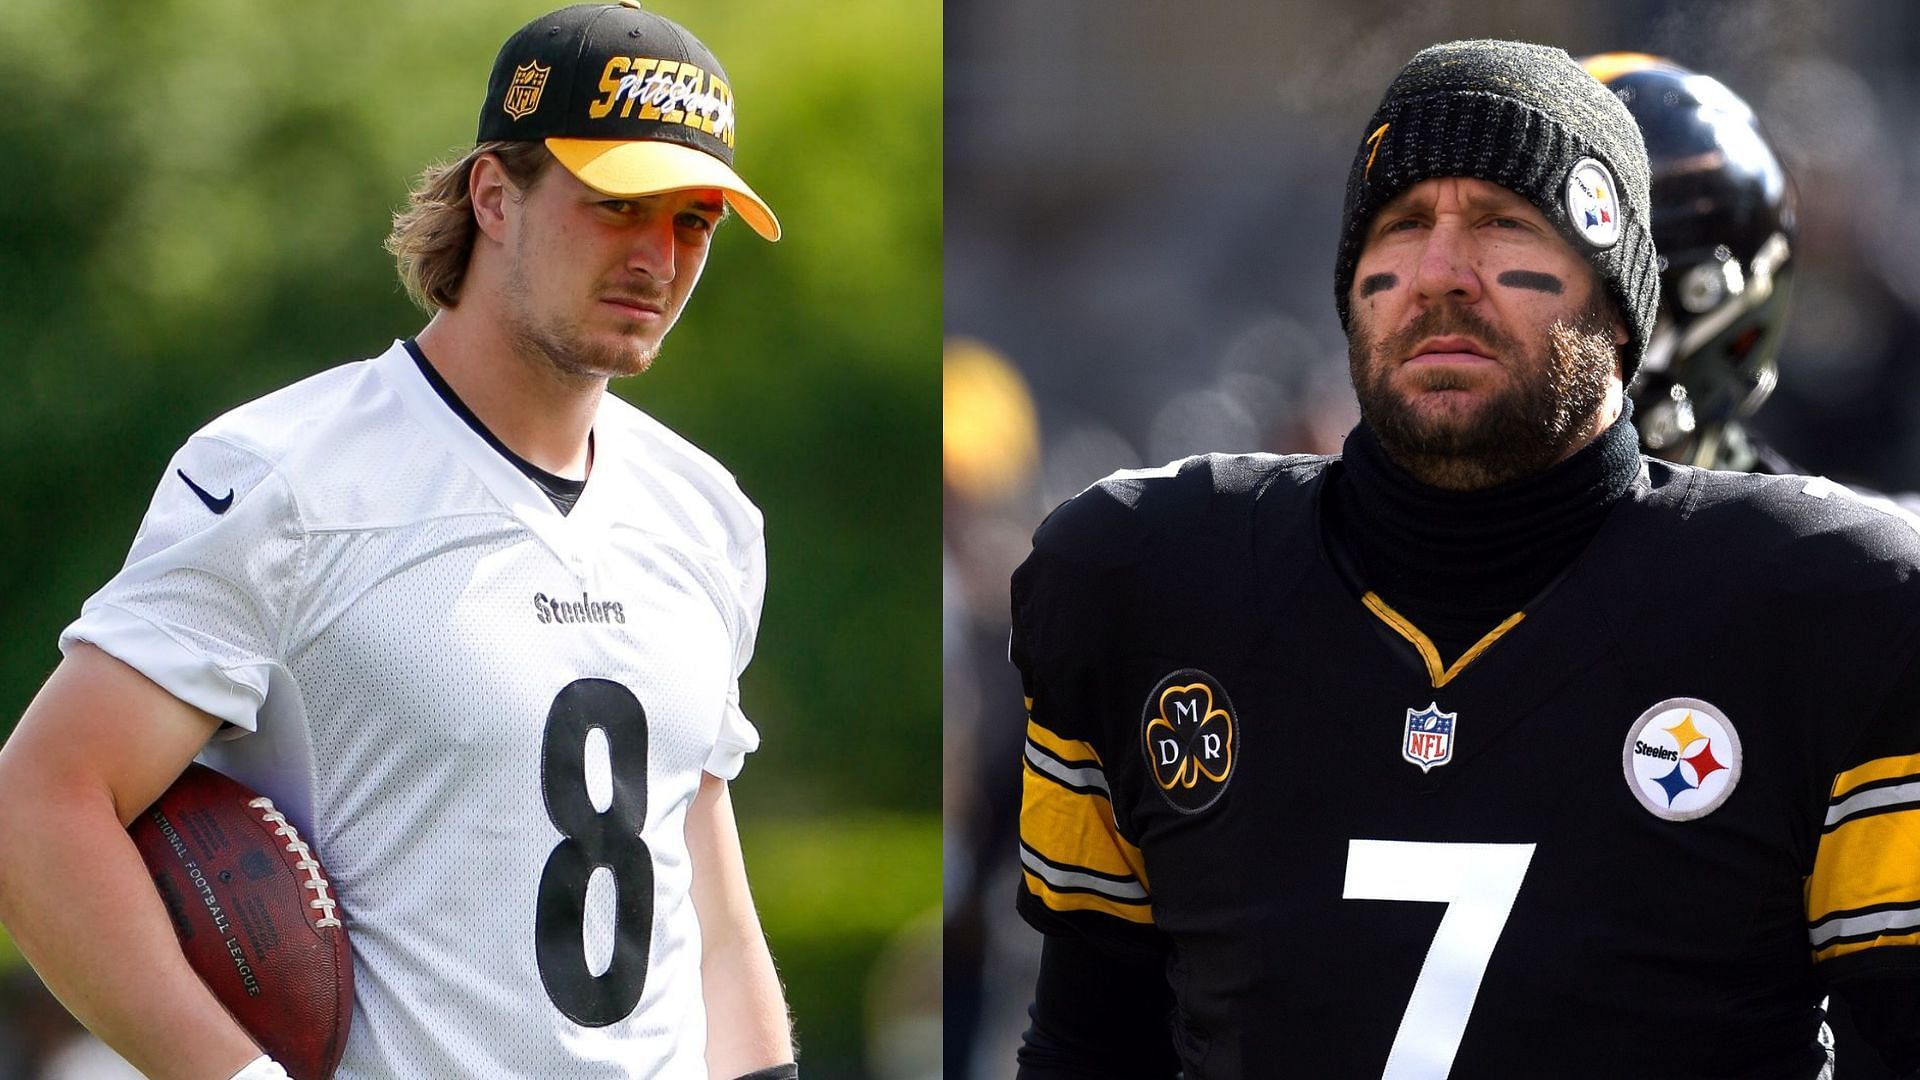 Has Kenny Pickett (L) this preseason shown he can succeed Ben Roethlisberger (R) as Steelers QB?